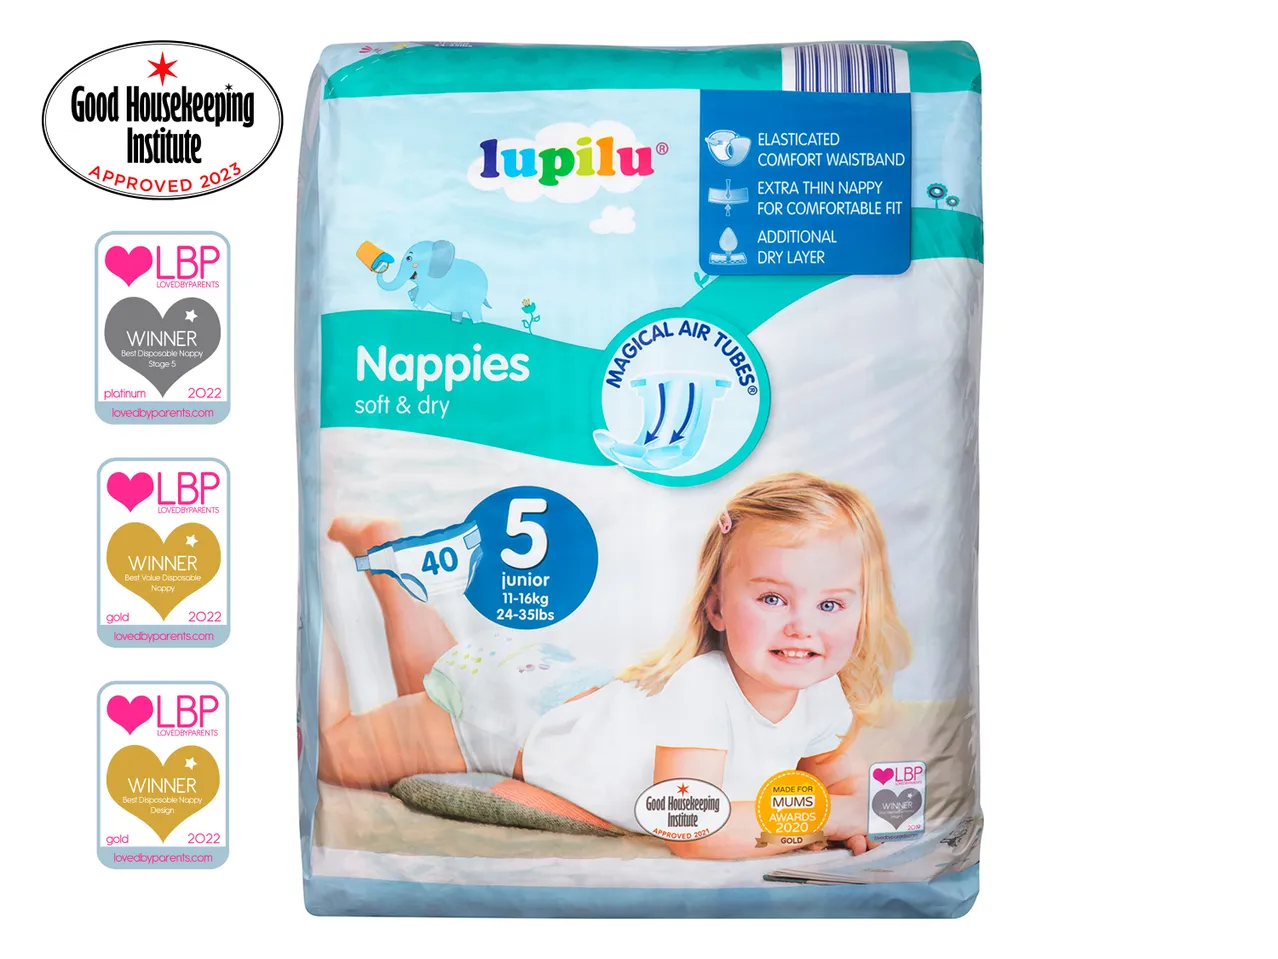 Go to full screen view: Lupilu Size 5 Junior Nappies - Image 1